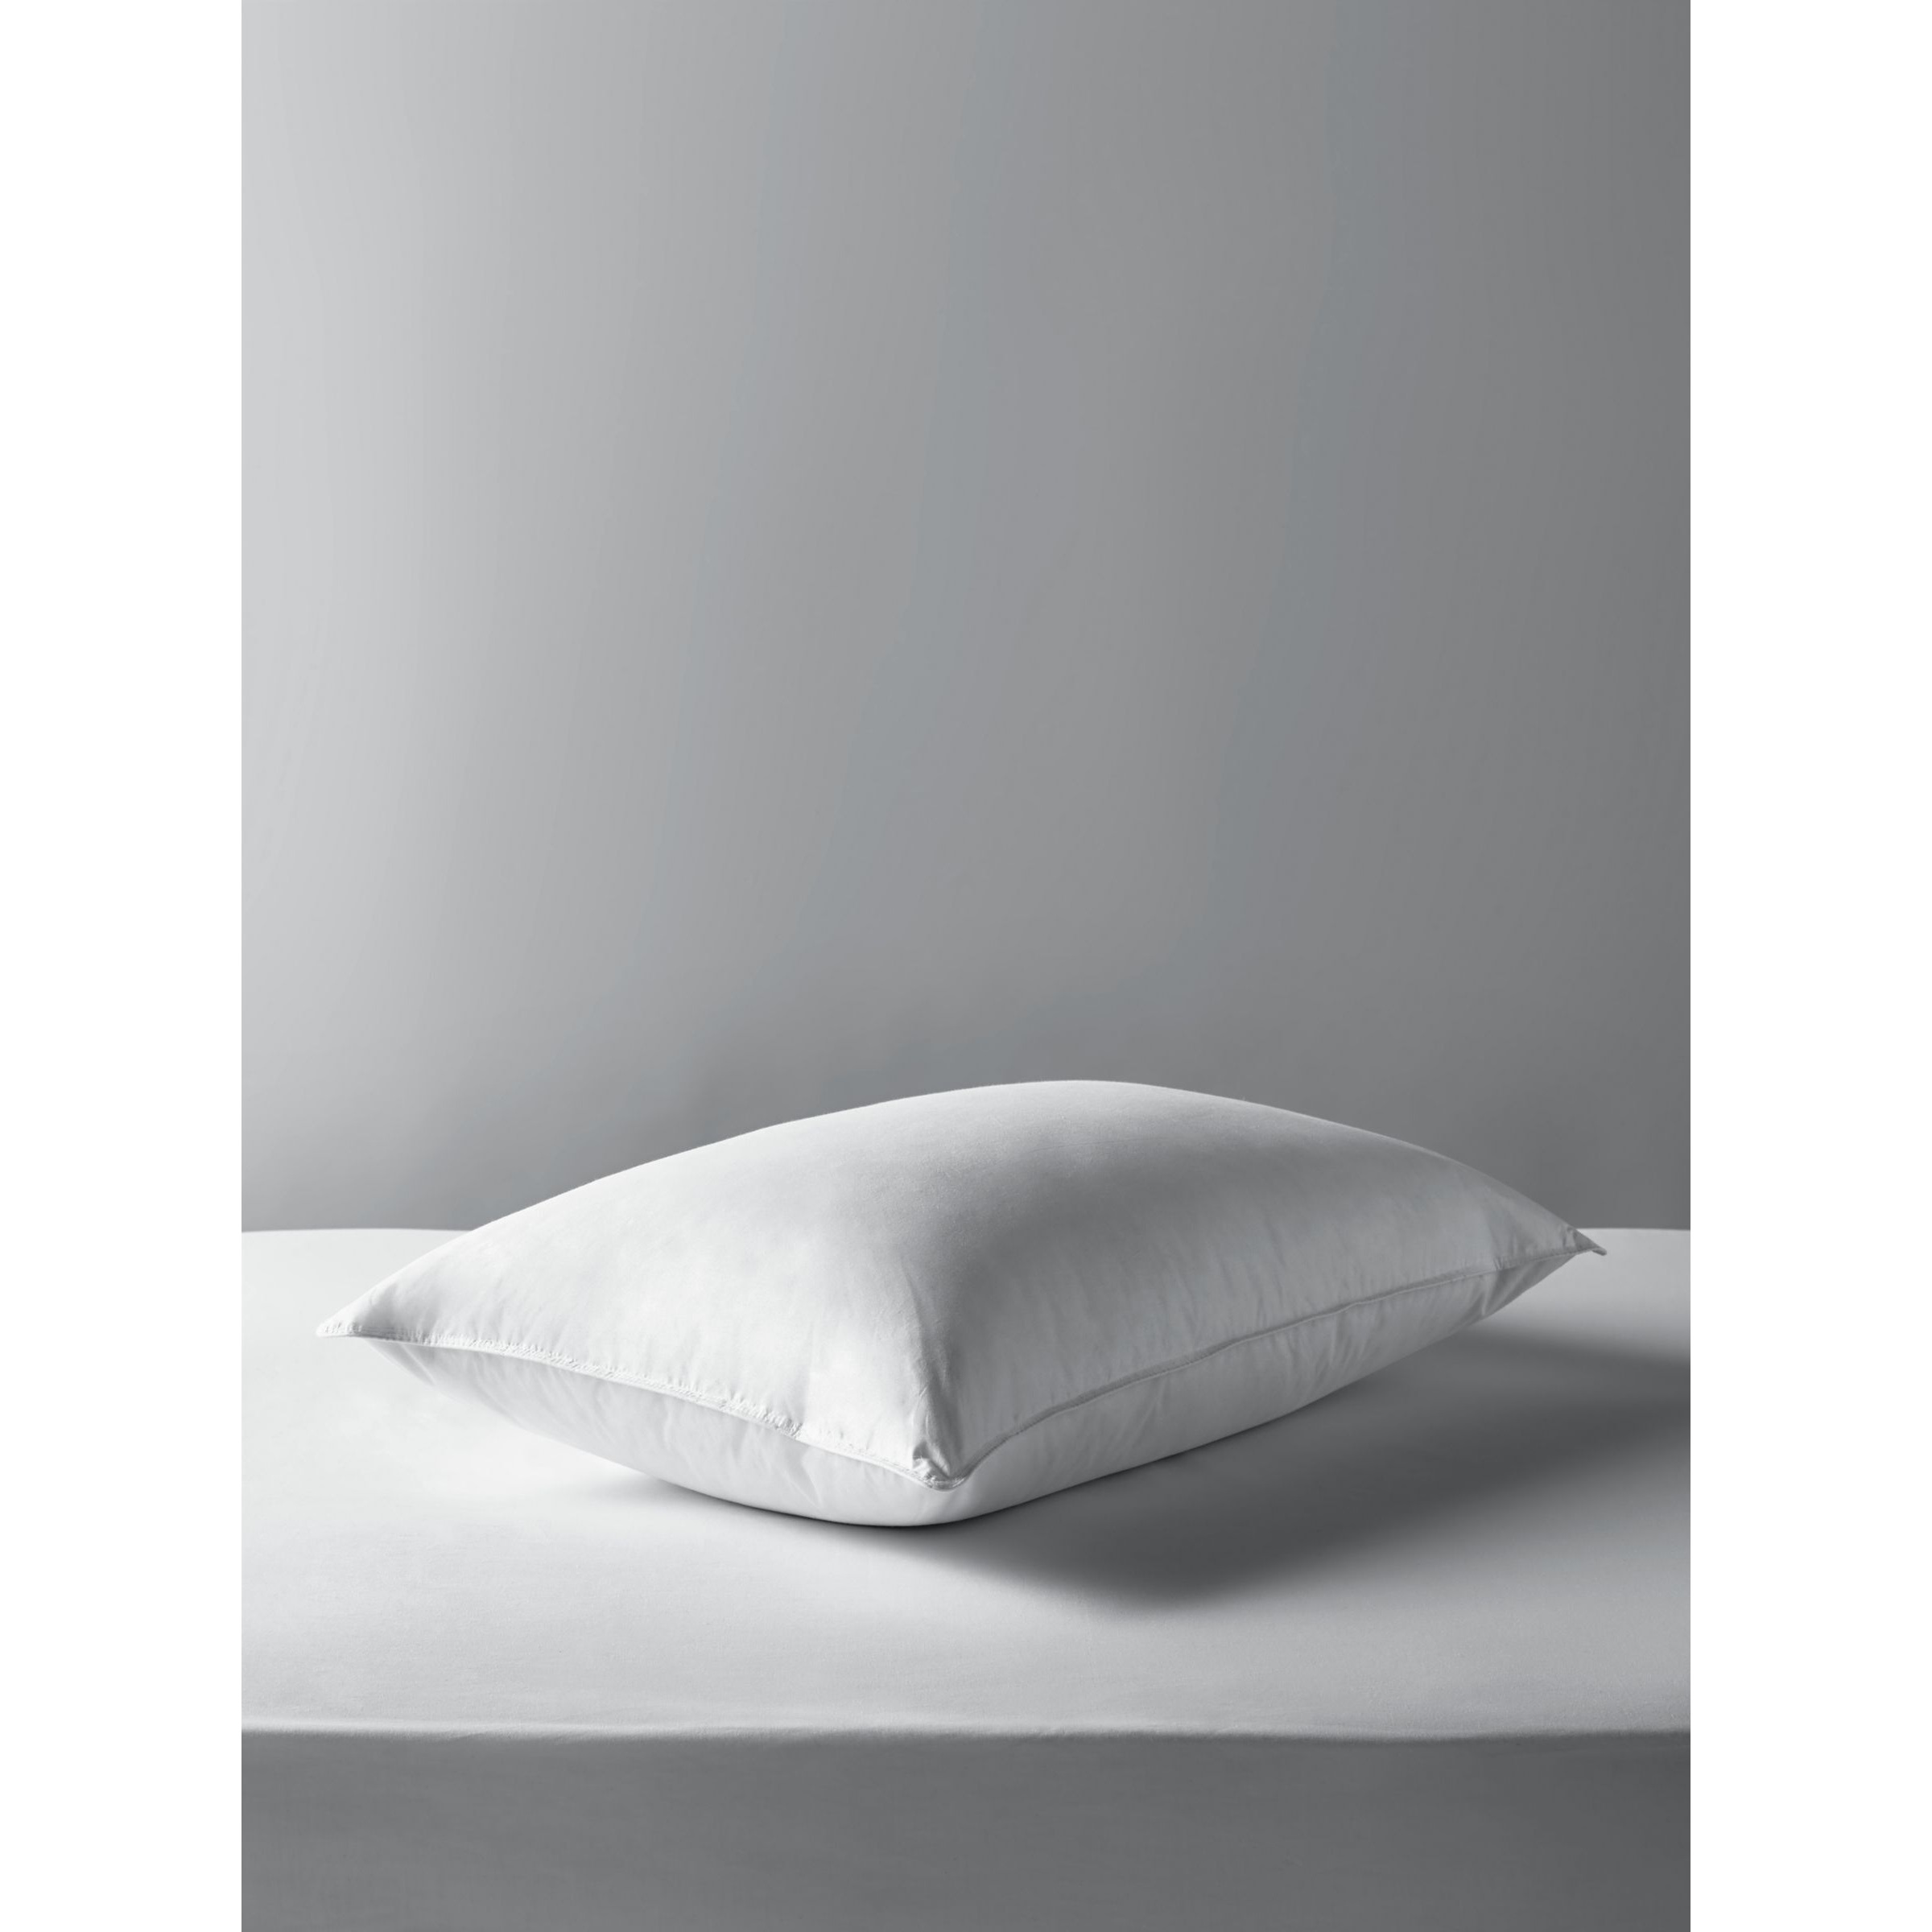 John Lewis Natural Duck Feather and Down Standard Pillow, Soft/Medium - image 1